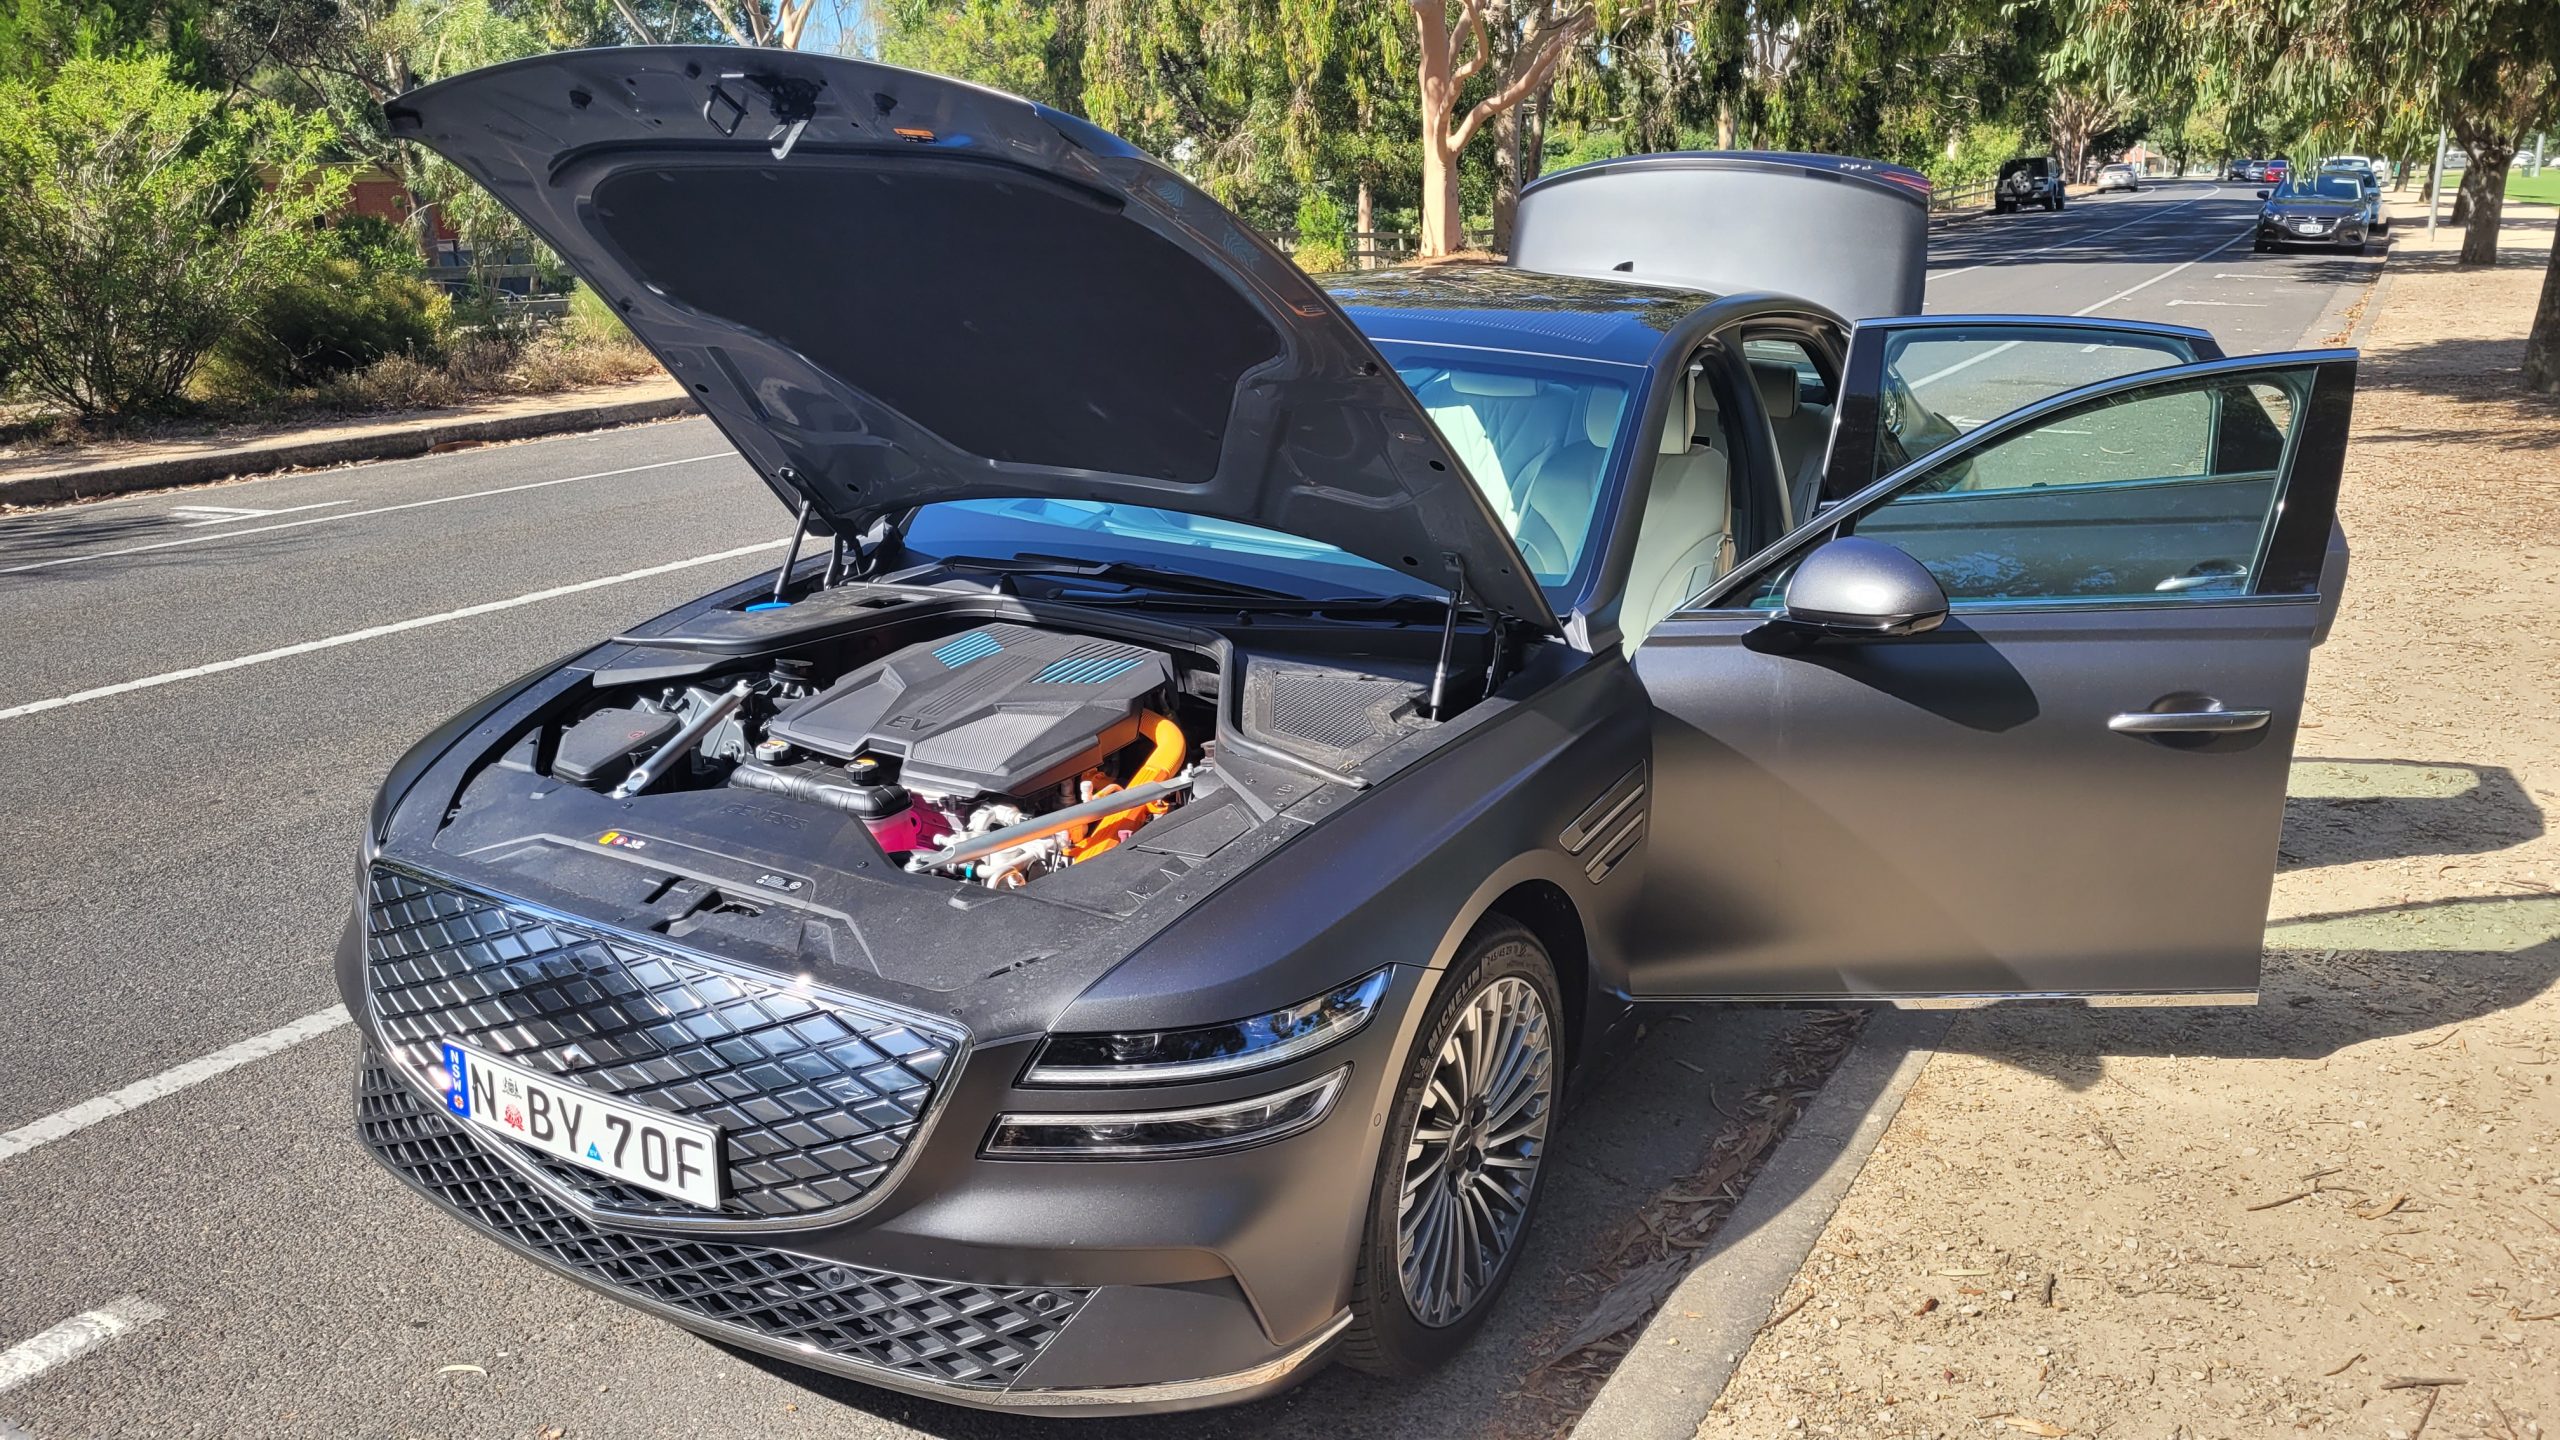 Genesis G80 electric vehicle front left view with bonnet open showing electric motor inside